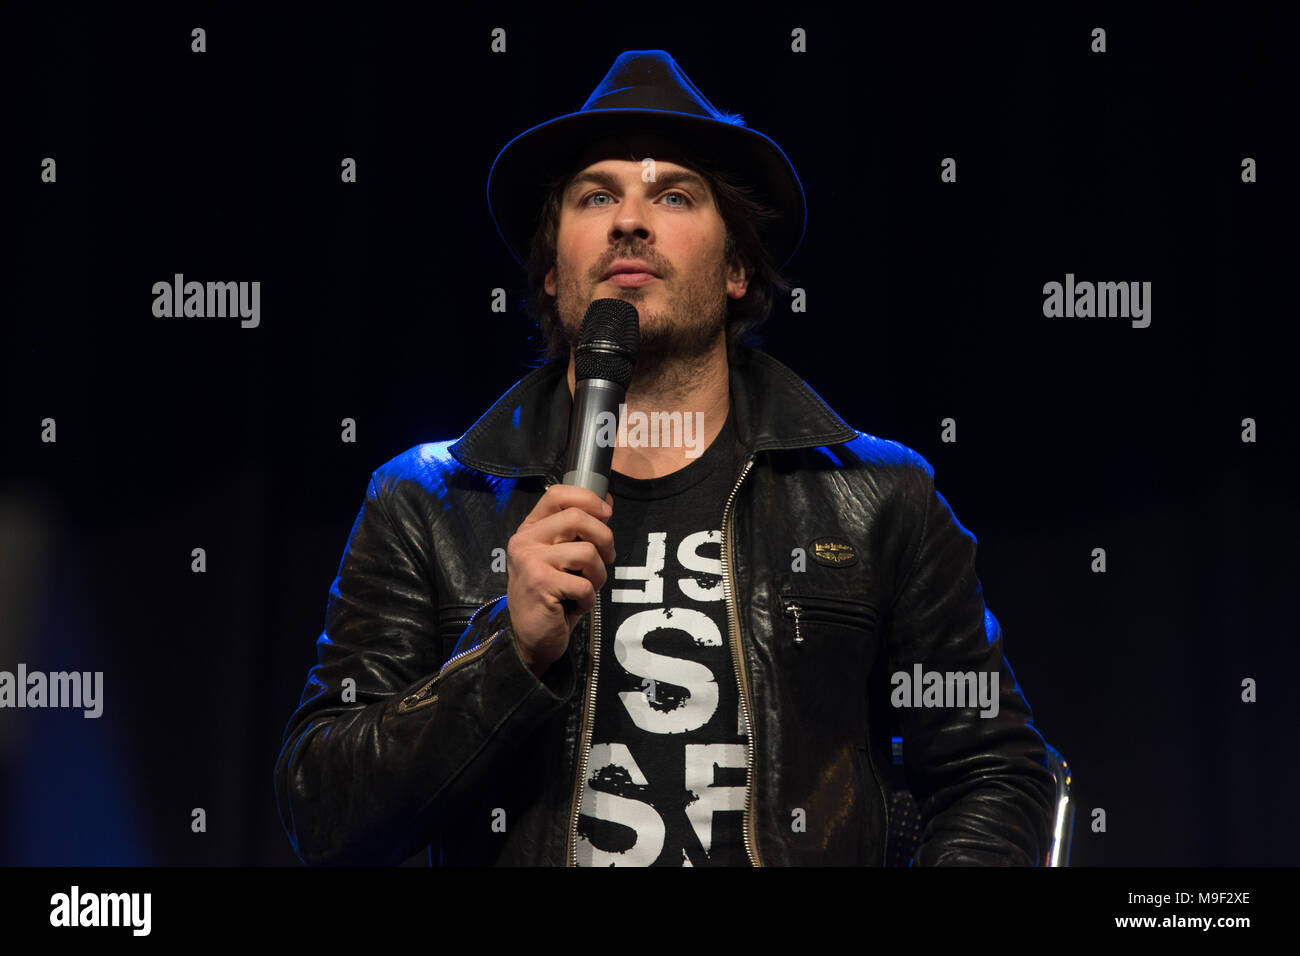 Bonn, Germany, 24 Mar 2018. Actor Ian Somerhalder (The Vampire Diaries, LOST, Smallville), panel, at MagicCon, a three-day (March 23-25 2018) fantasy & mystery fan convention. Credit: Markus Wissmann/Alamy Live News Stock Photo